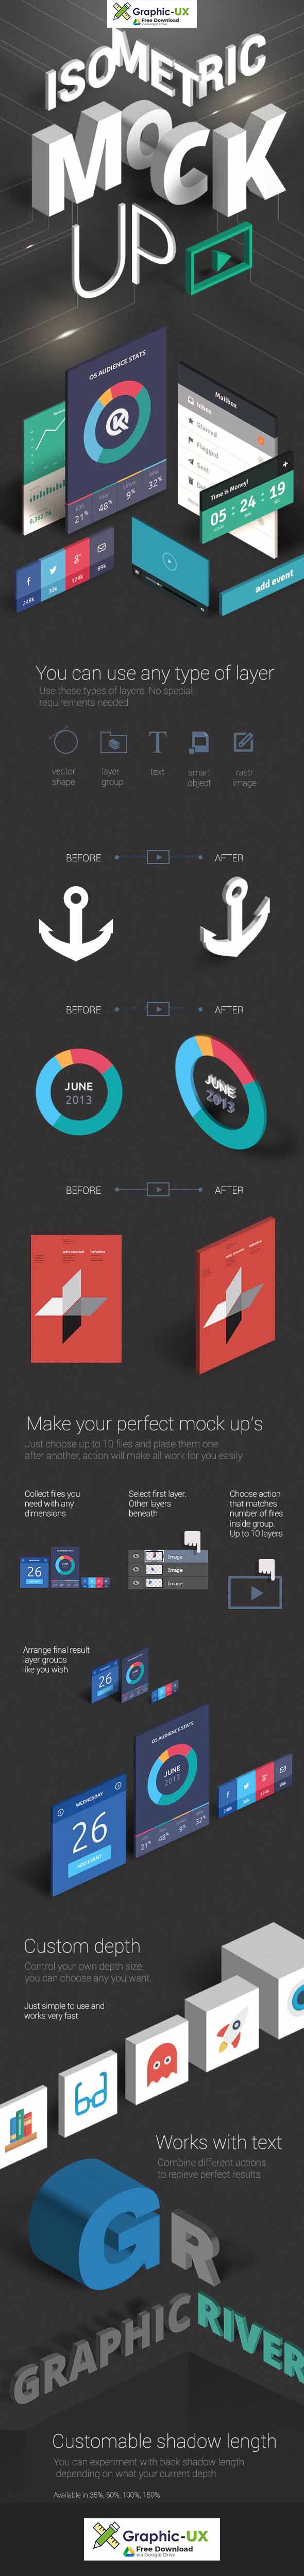 Isometric Mock UP Actions vol.2